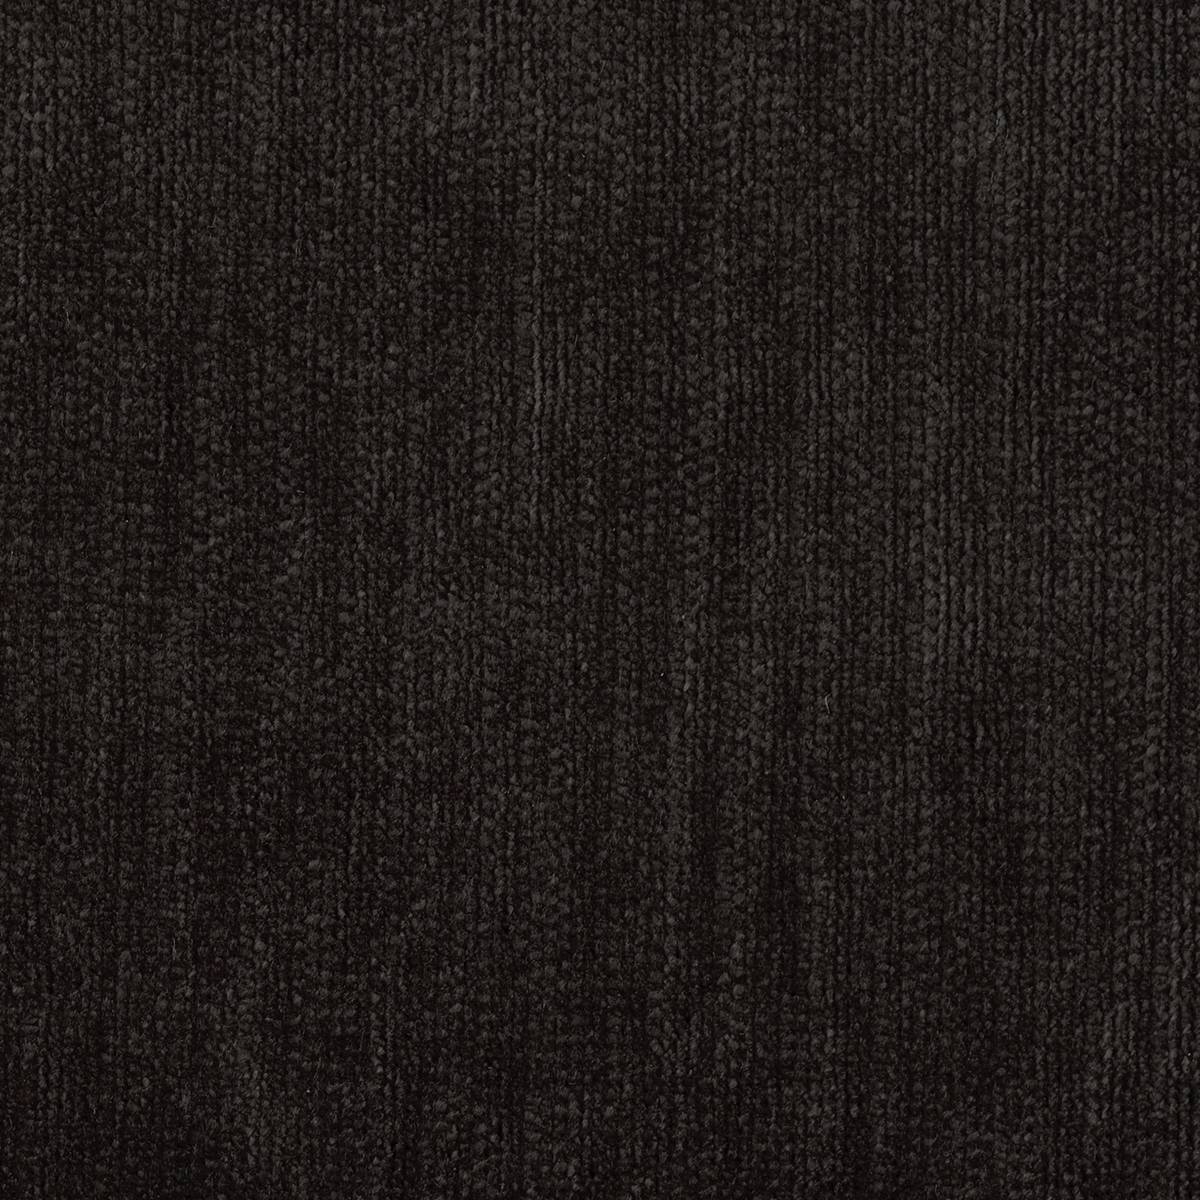 Momentum Velvets Charcoal Fabric by Harlequin